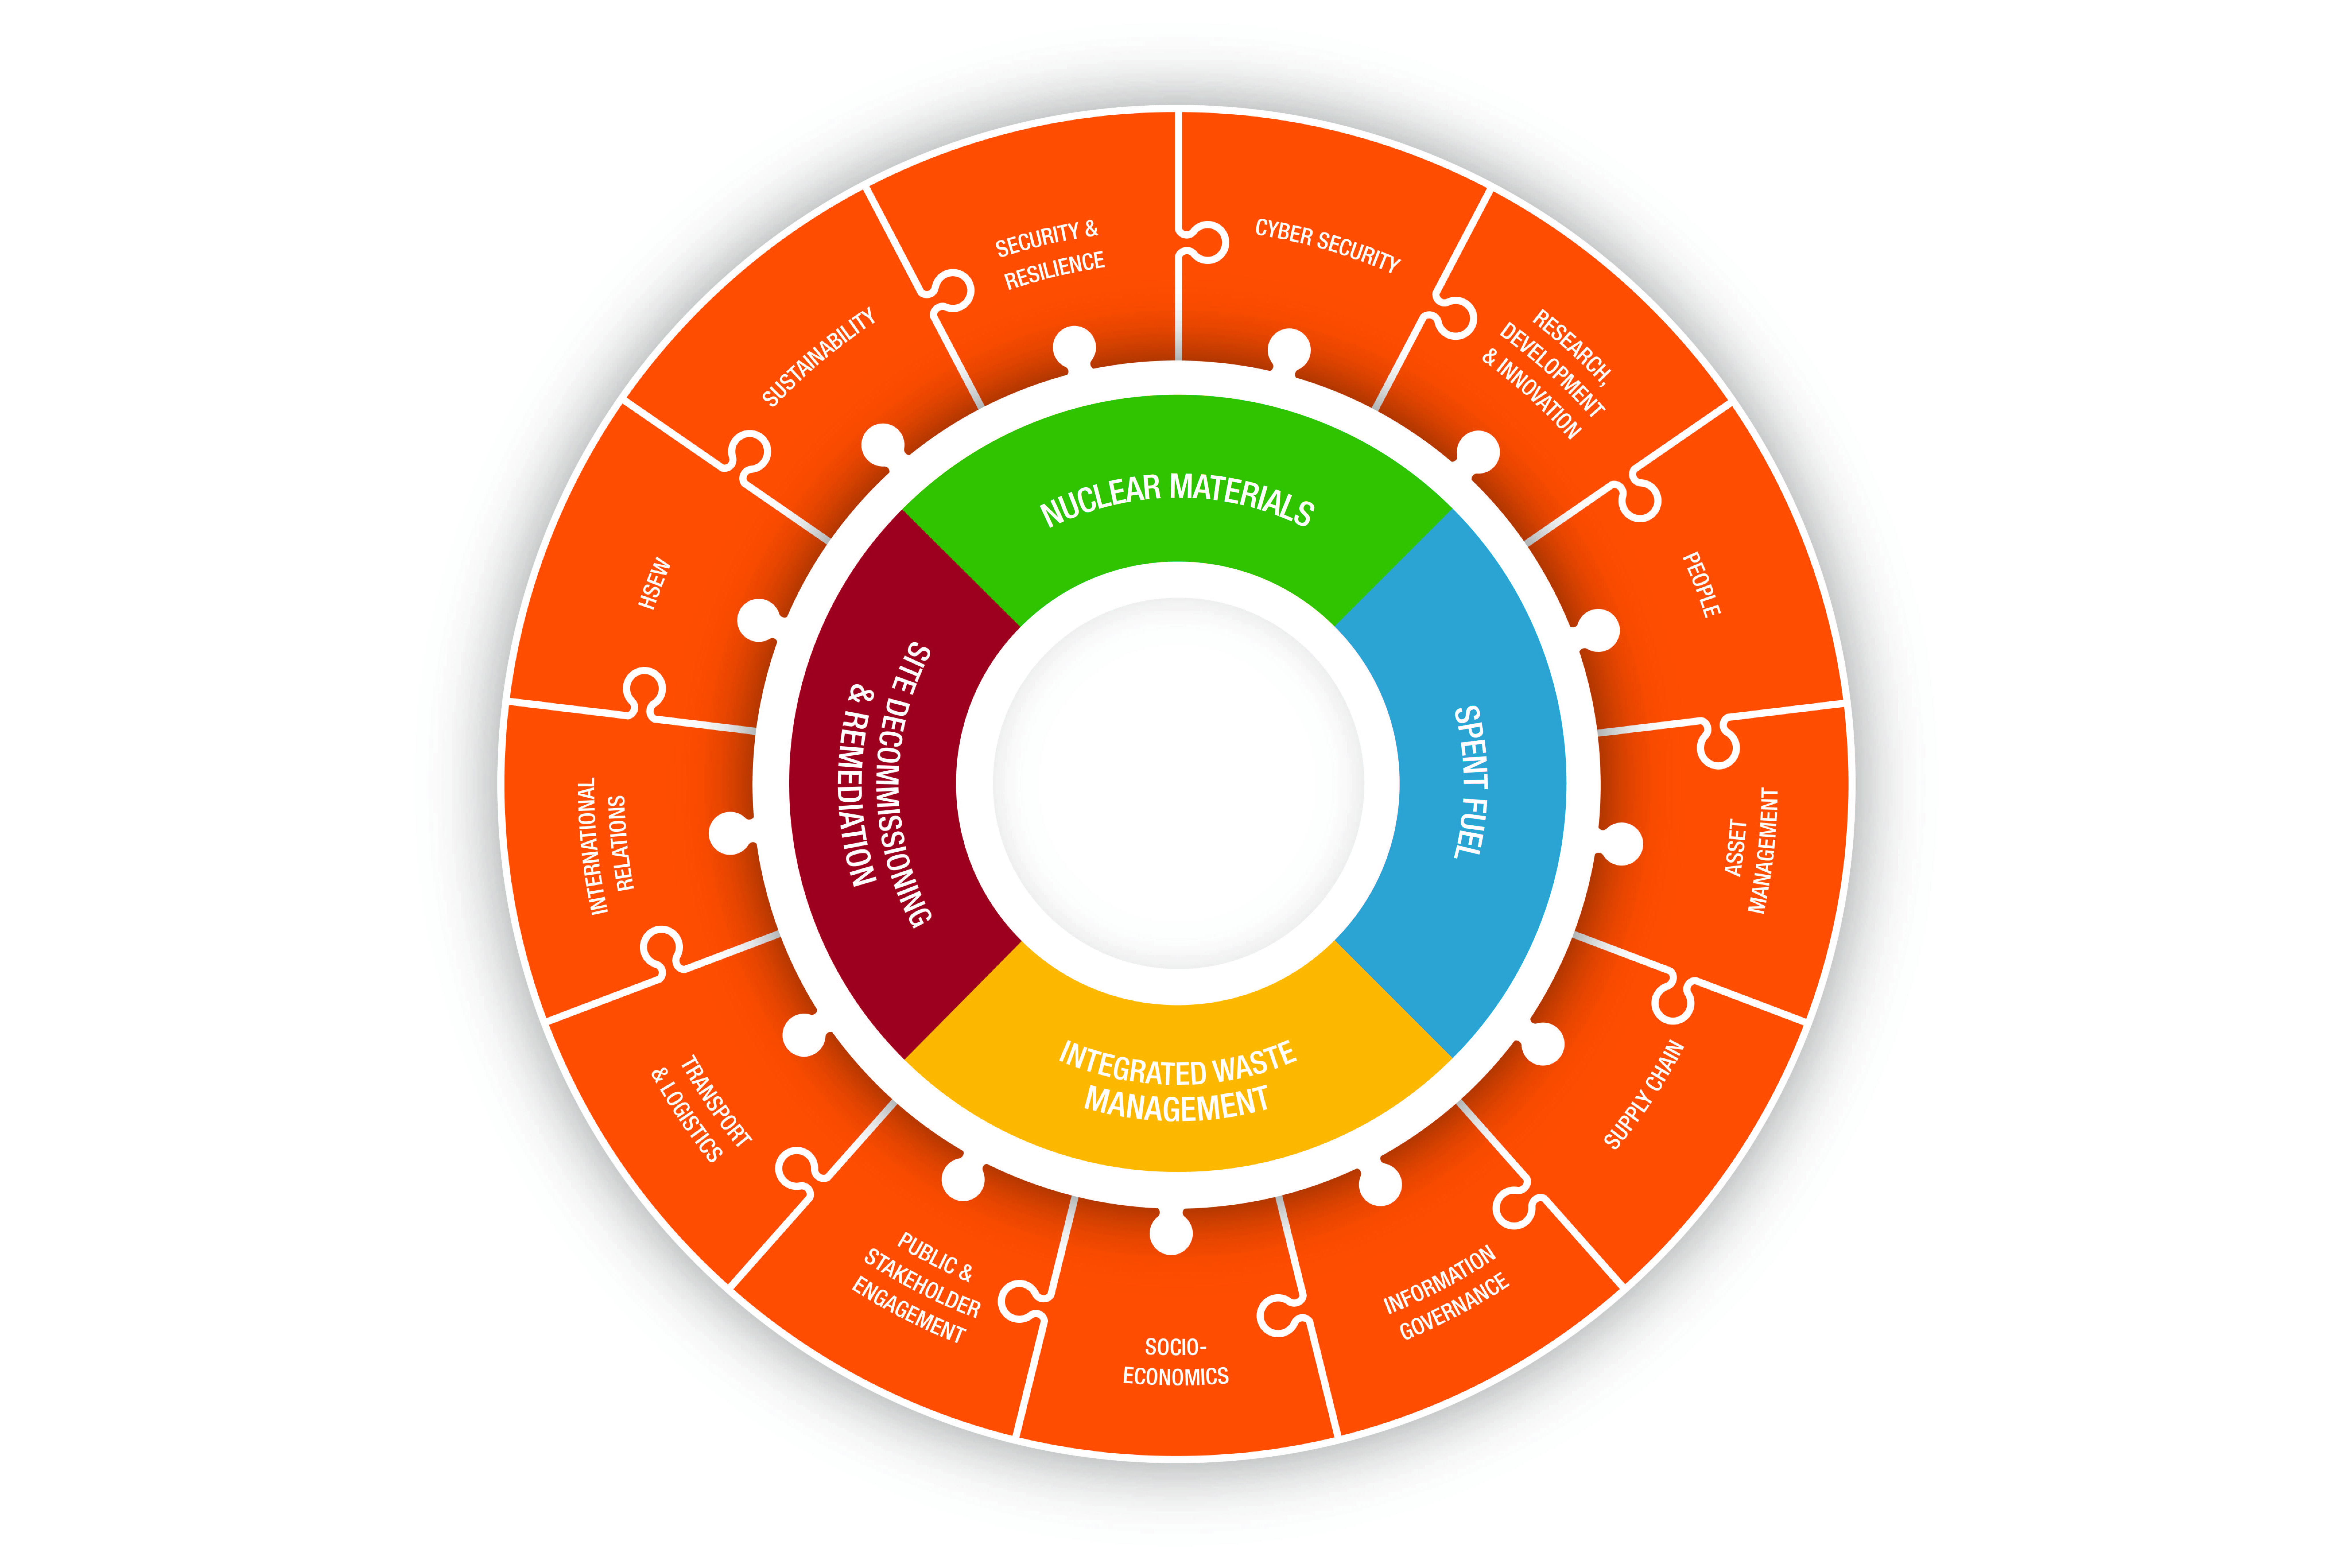 Infographic showing the links between the driving themes and the critical enablers in a circle with jigsaw shapes